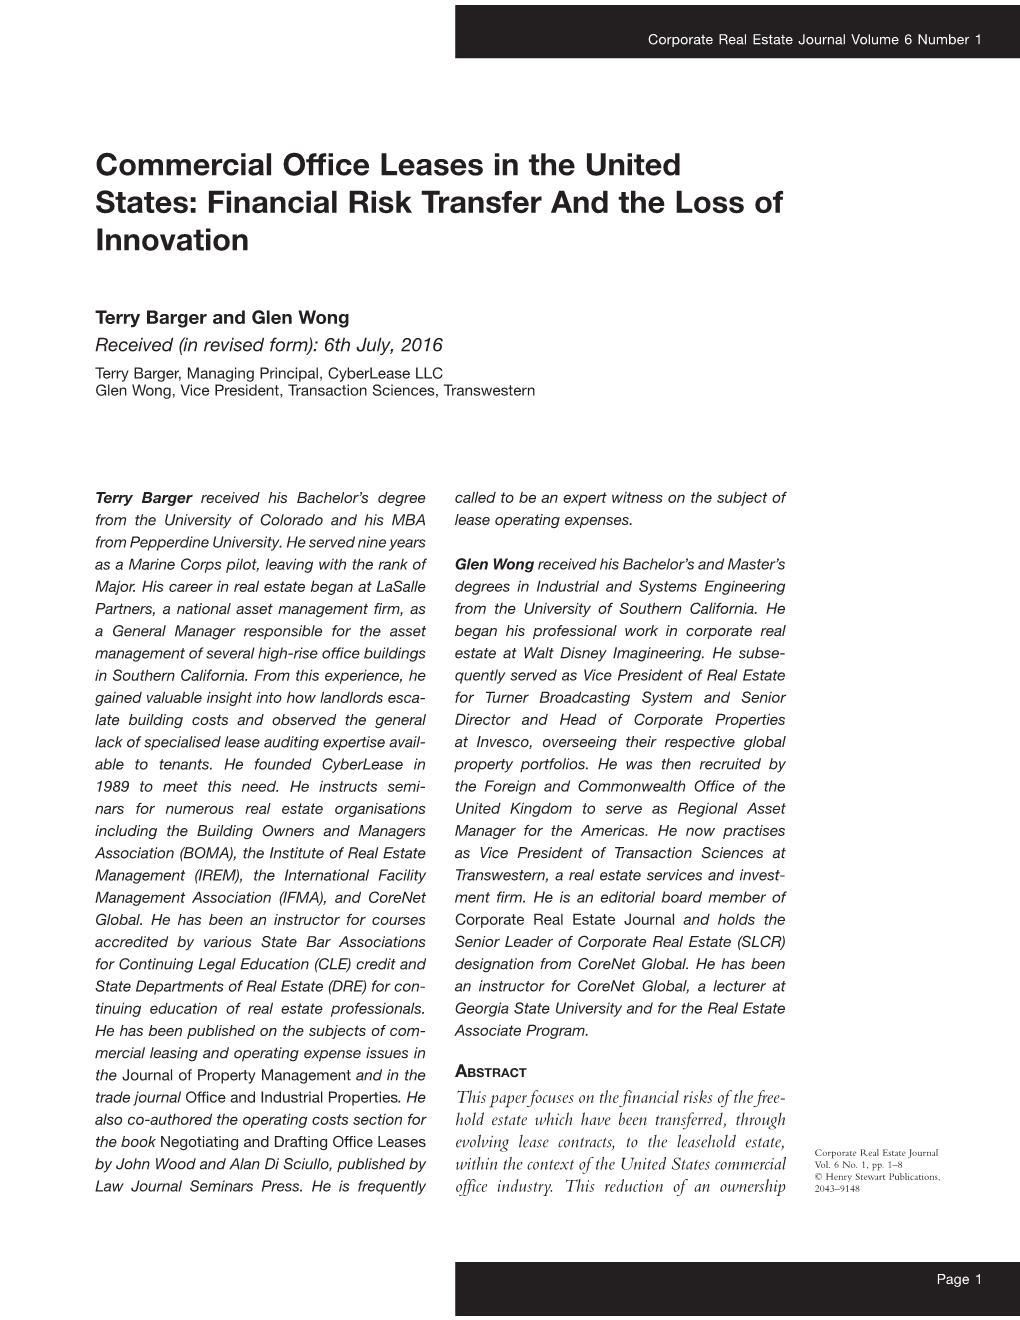 Commercial Office Leases in the United States: Financial Risk Transfer and the Loss of Innovation